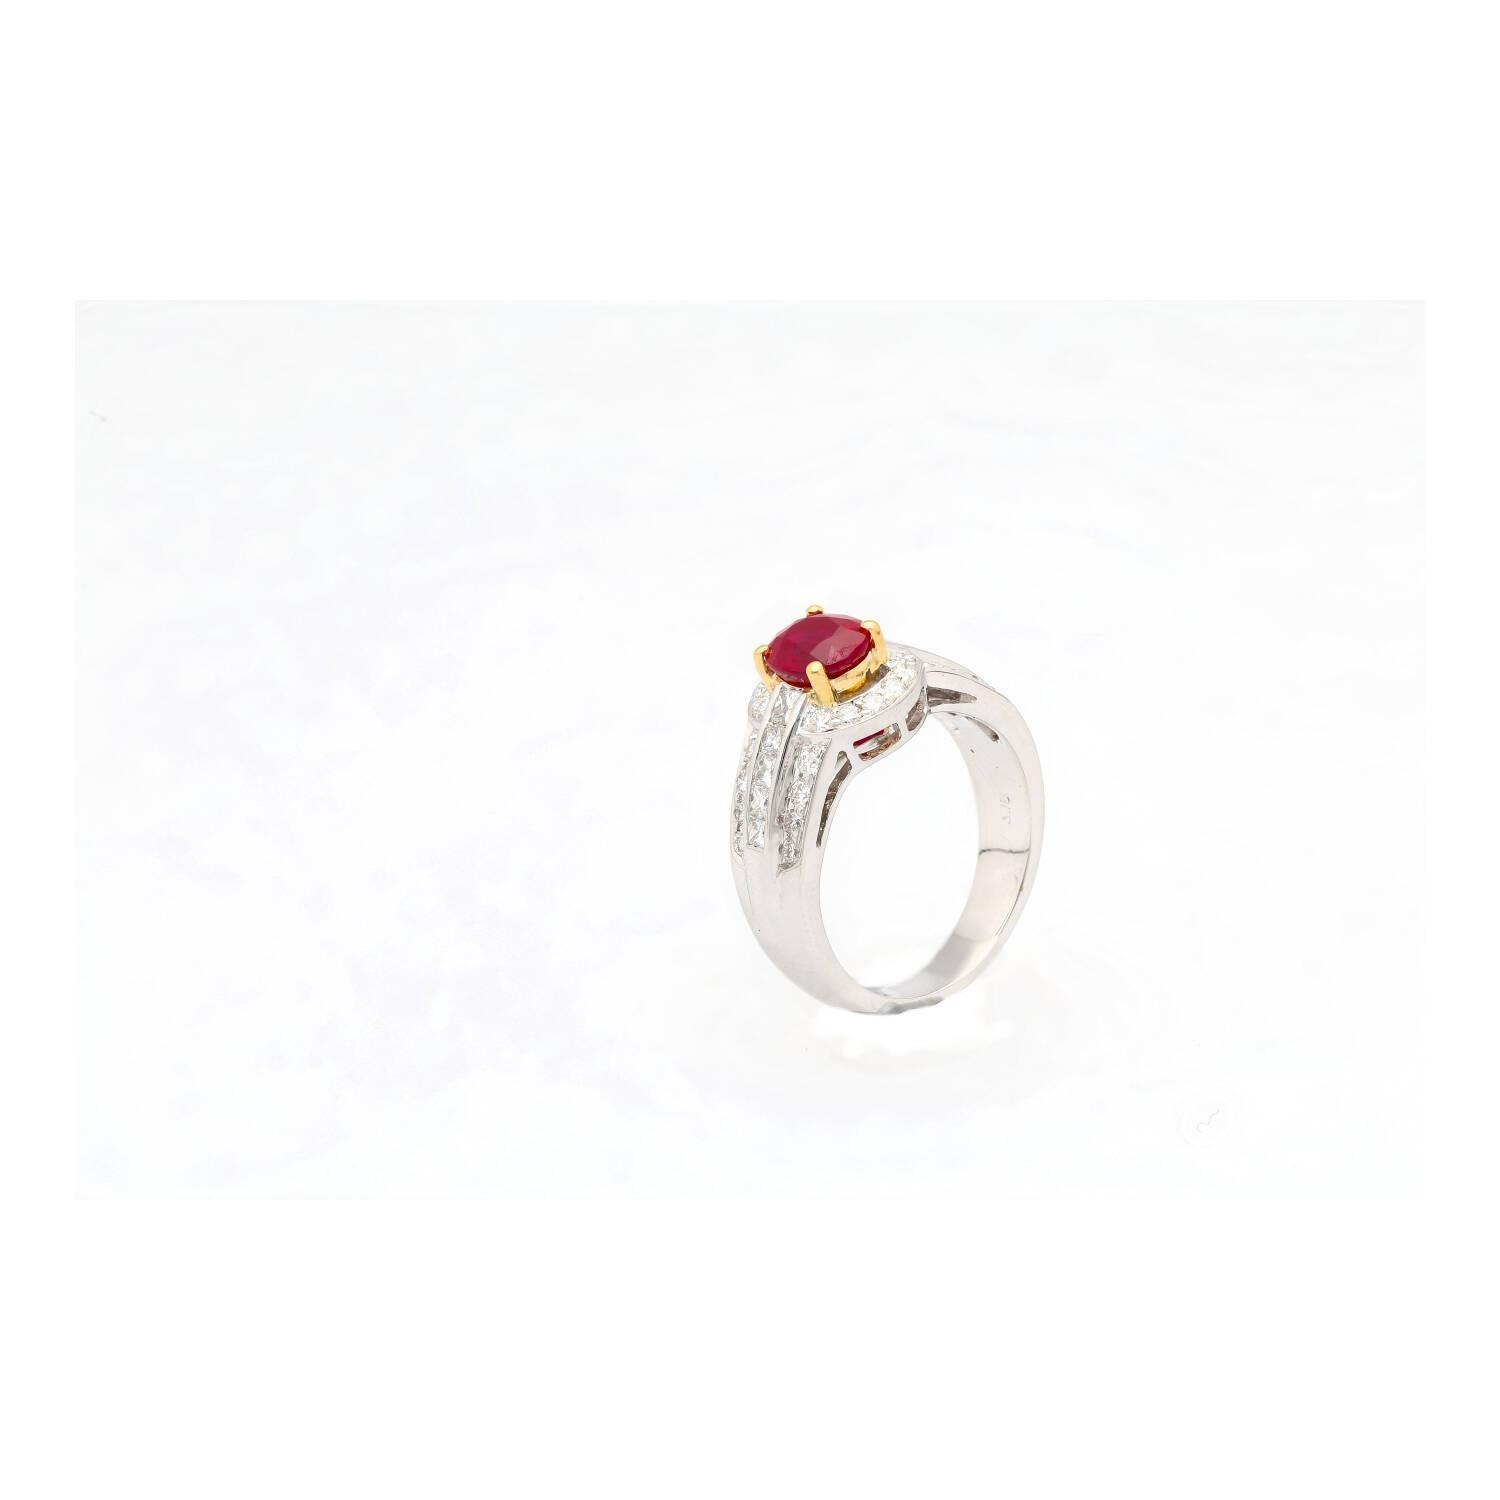 GRS Certified 1.37 Carat Burma Pigeon Blood Ruby & Diamond Ring in 18K Gold In New Condition For Sale In Miami, FL